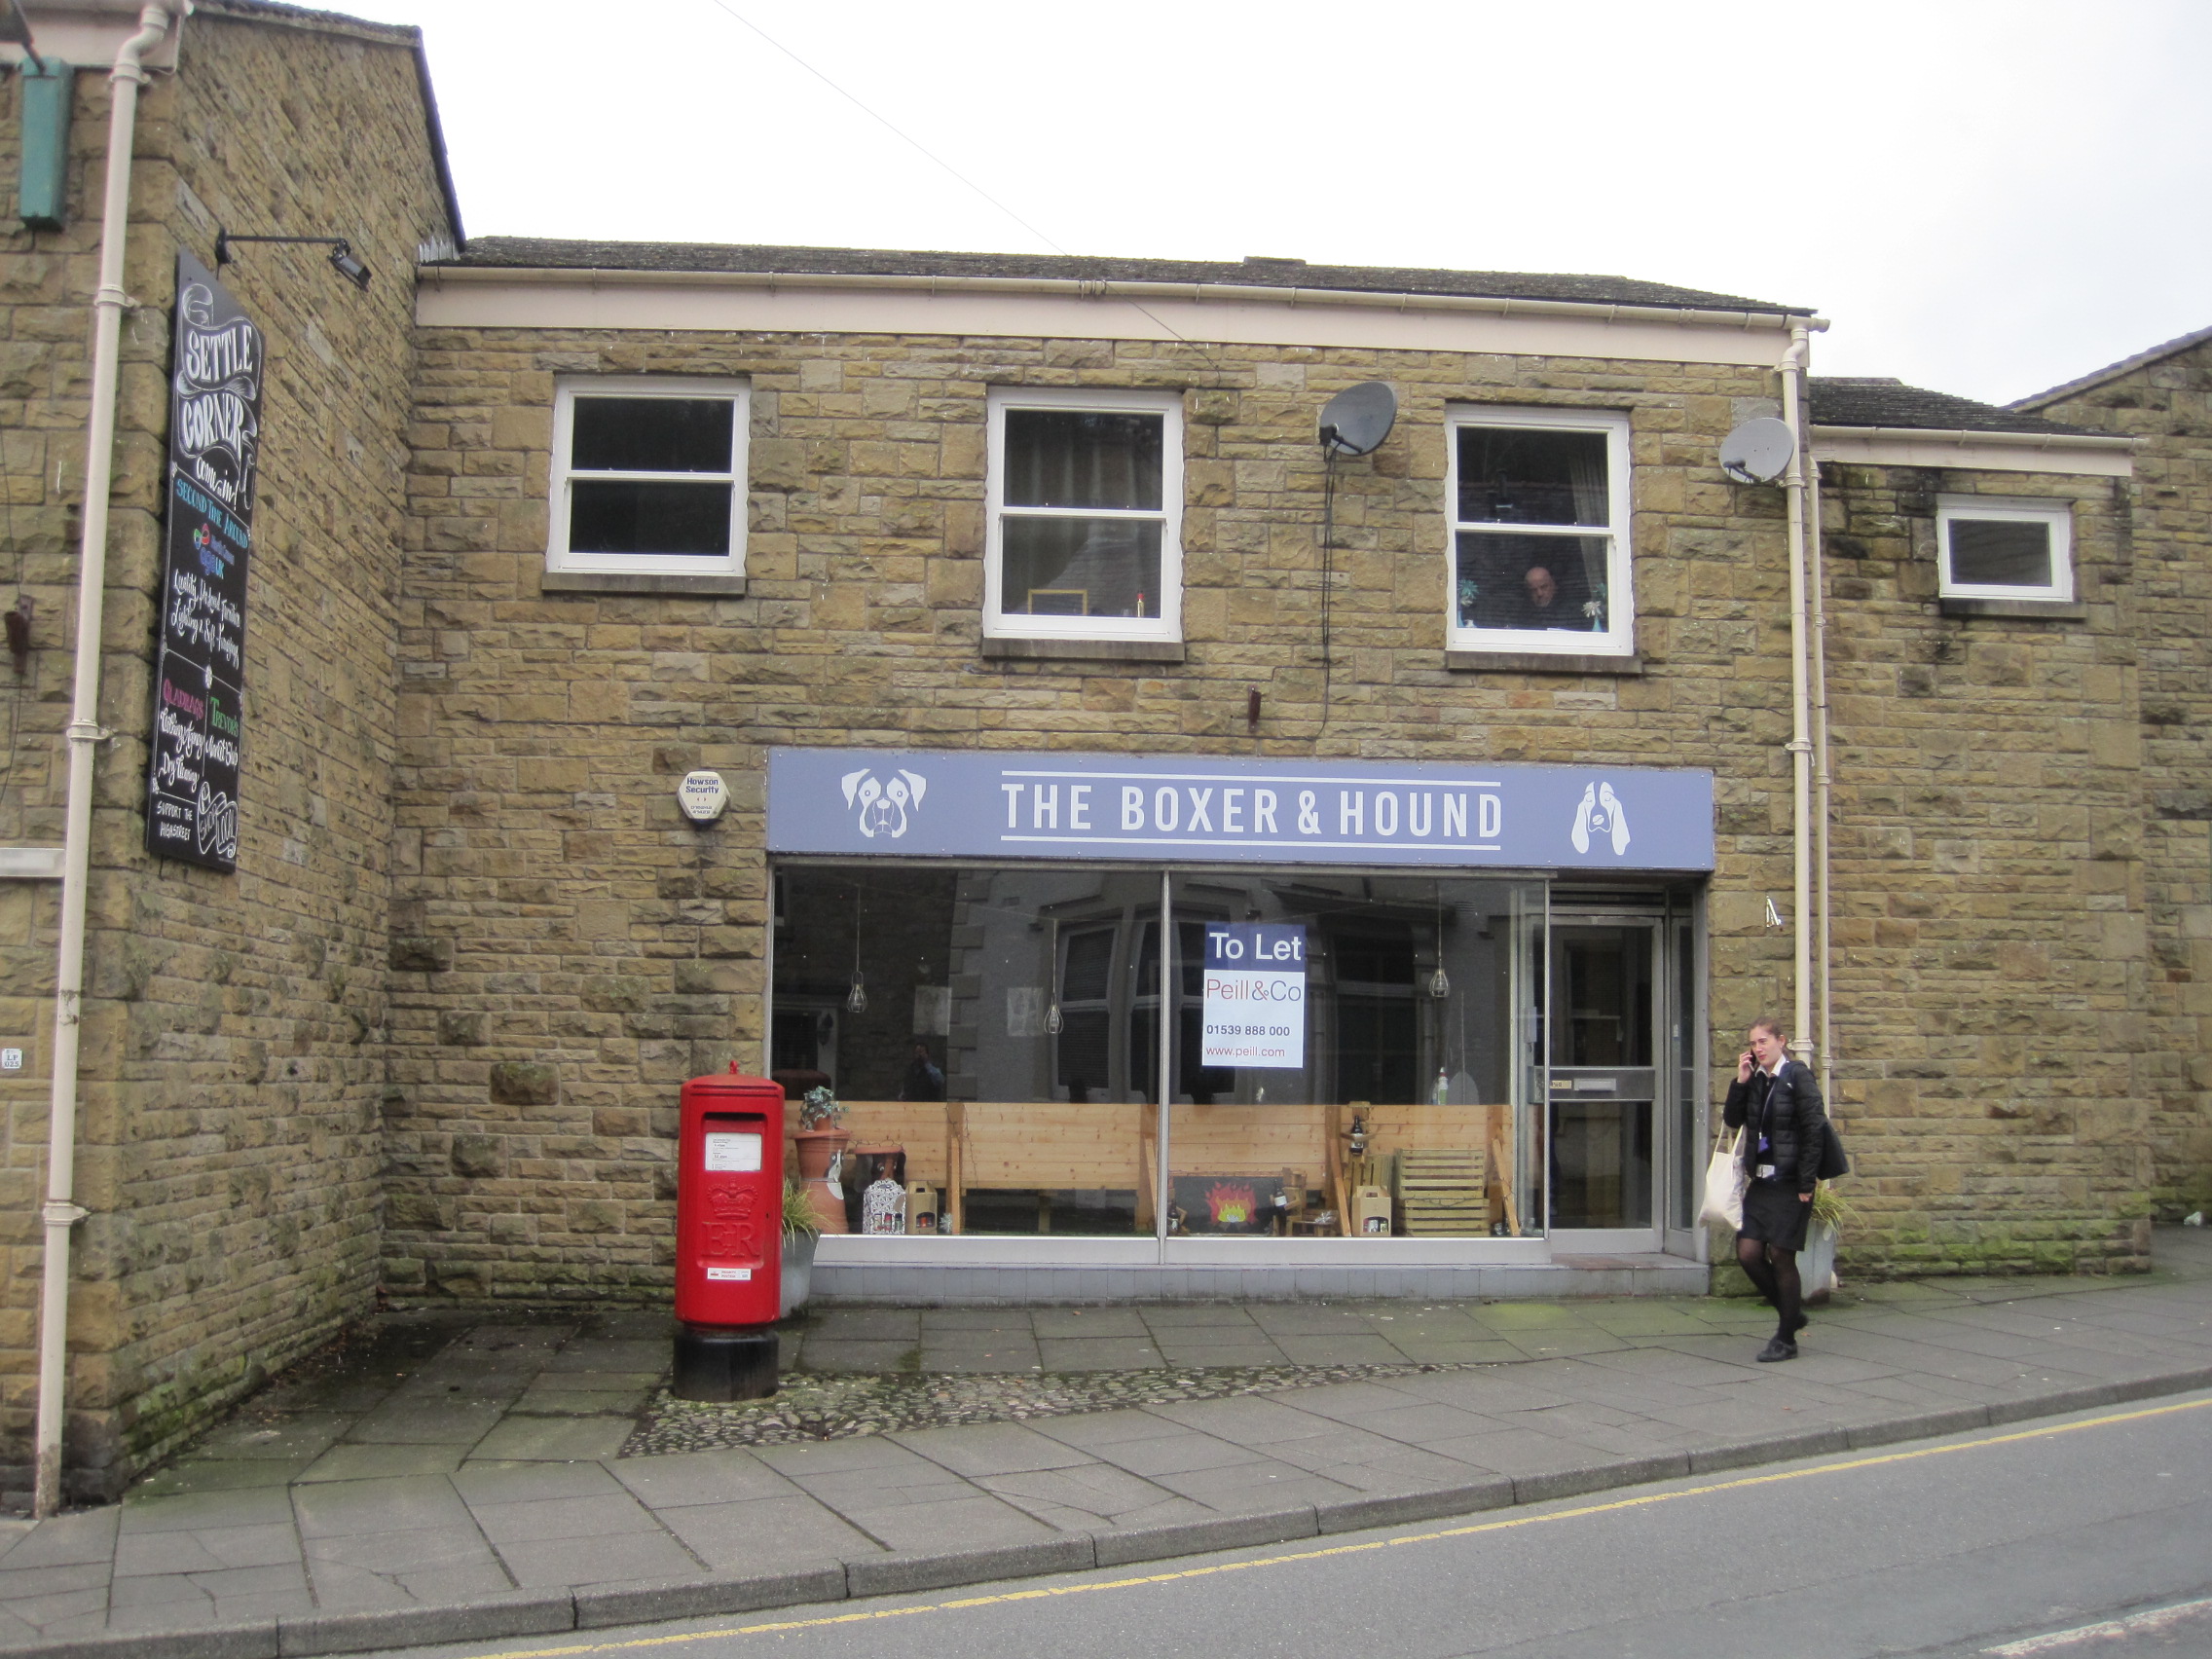 Yorkshire Dales shop Let on a new lease.